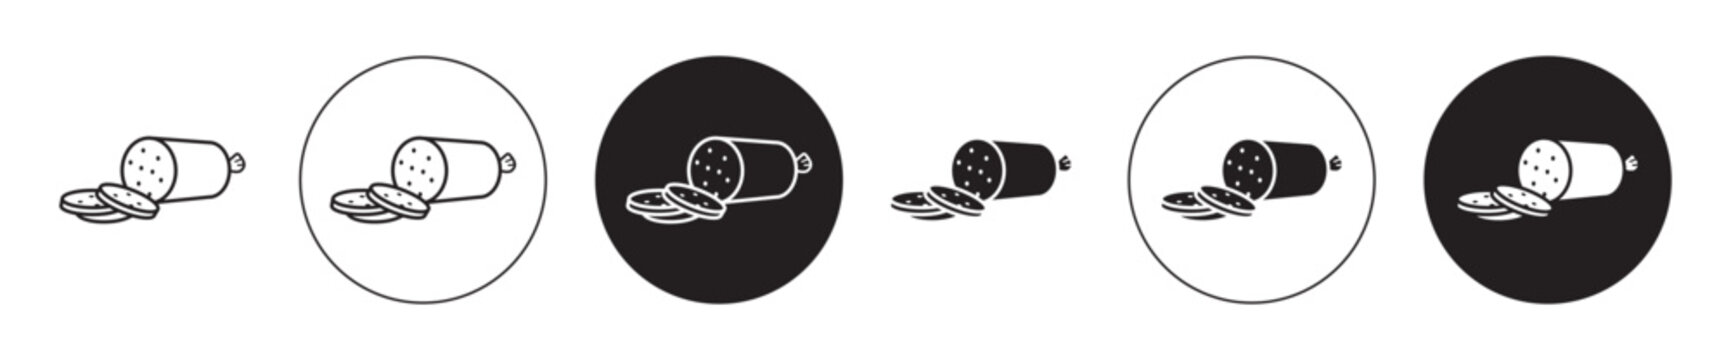 Sausage salami icon set. pepperoni meat slice vector symbol in black filled and outlined style.